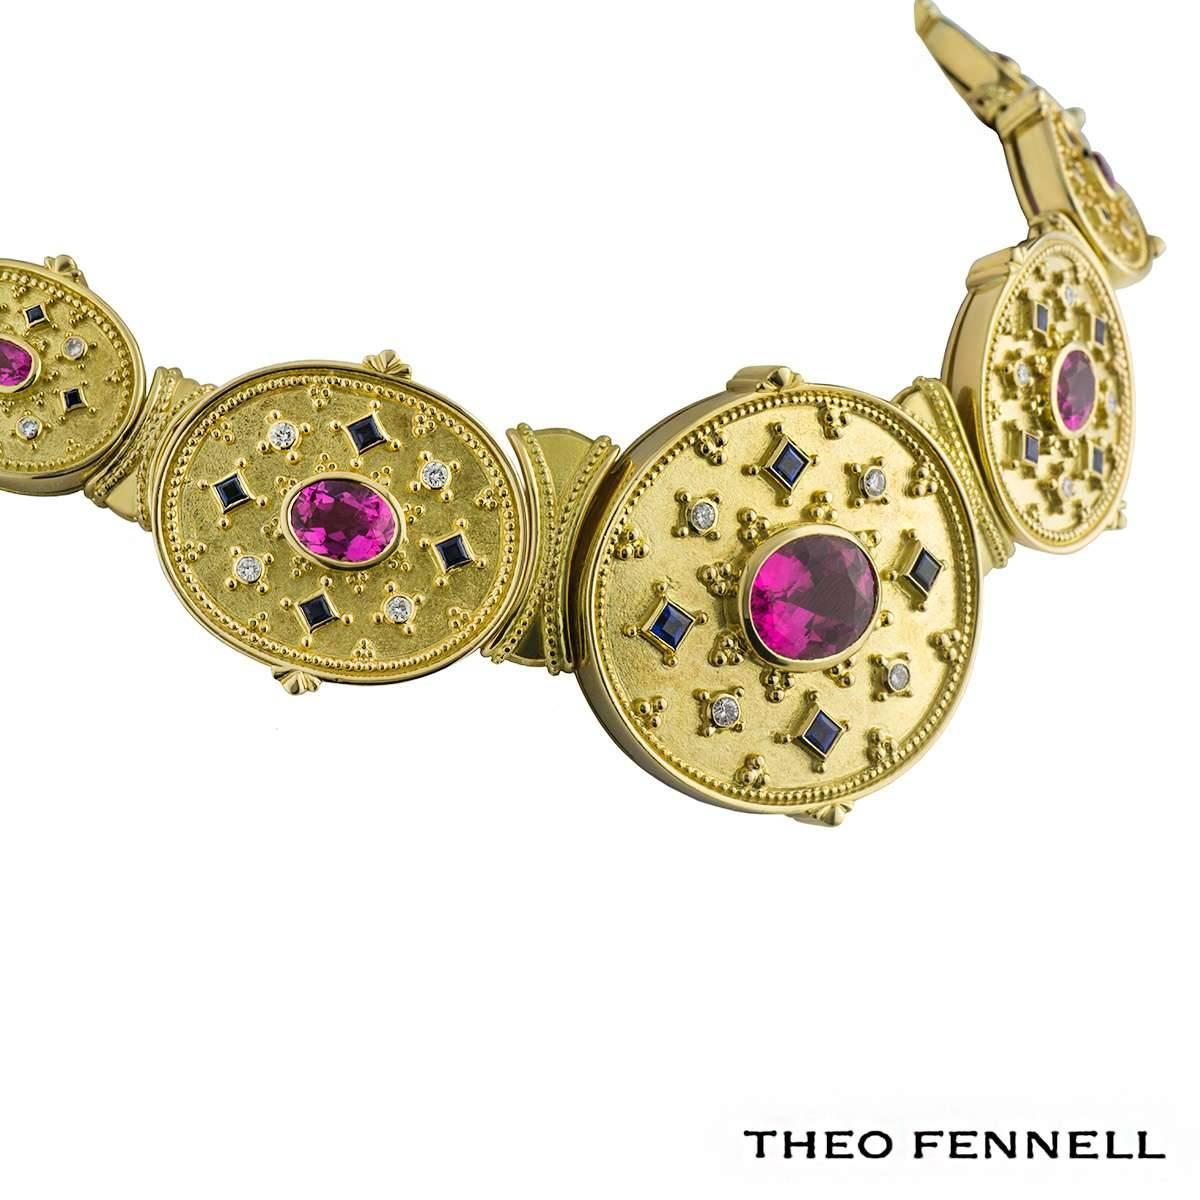 A vintage 18k yellow gold Theo Fennell diamond sapphire and tourmaline necklace and earrings. The necklace comprises of a oval gold motif set to the centre with a oval cut pink tourmaline in a rubover setting with 4 round brilliant cut diamonds and